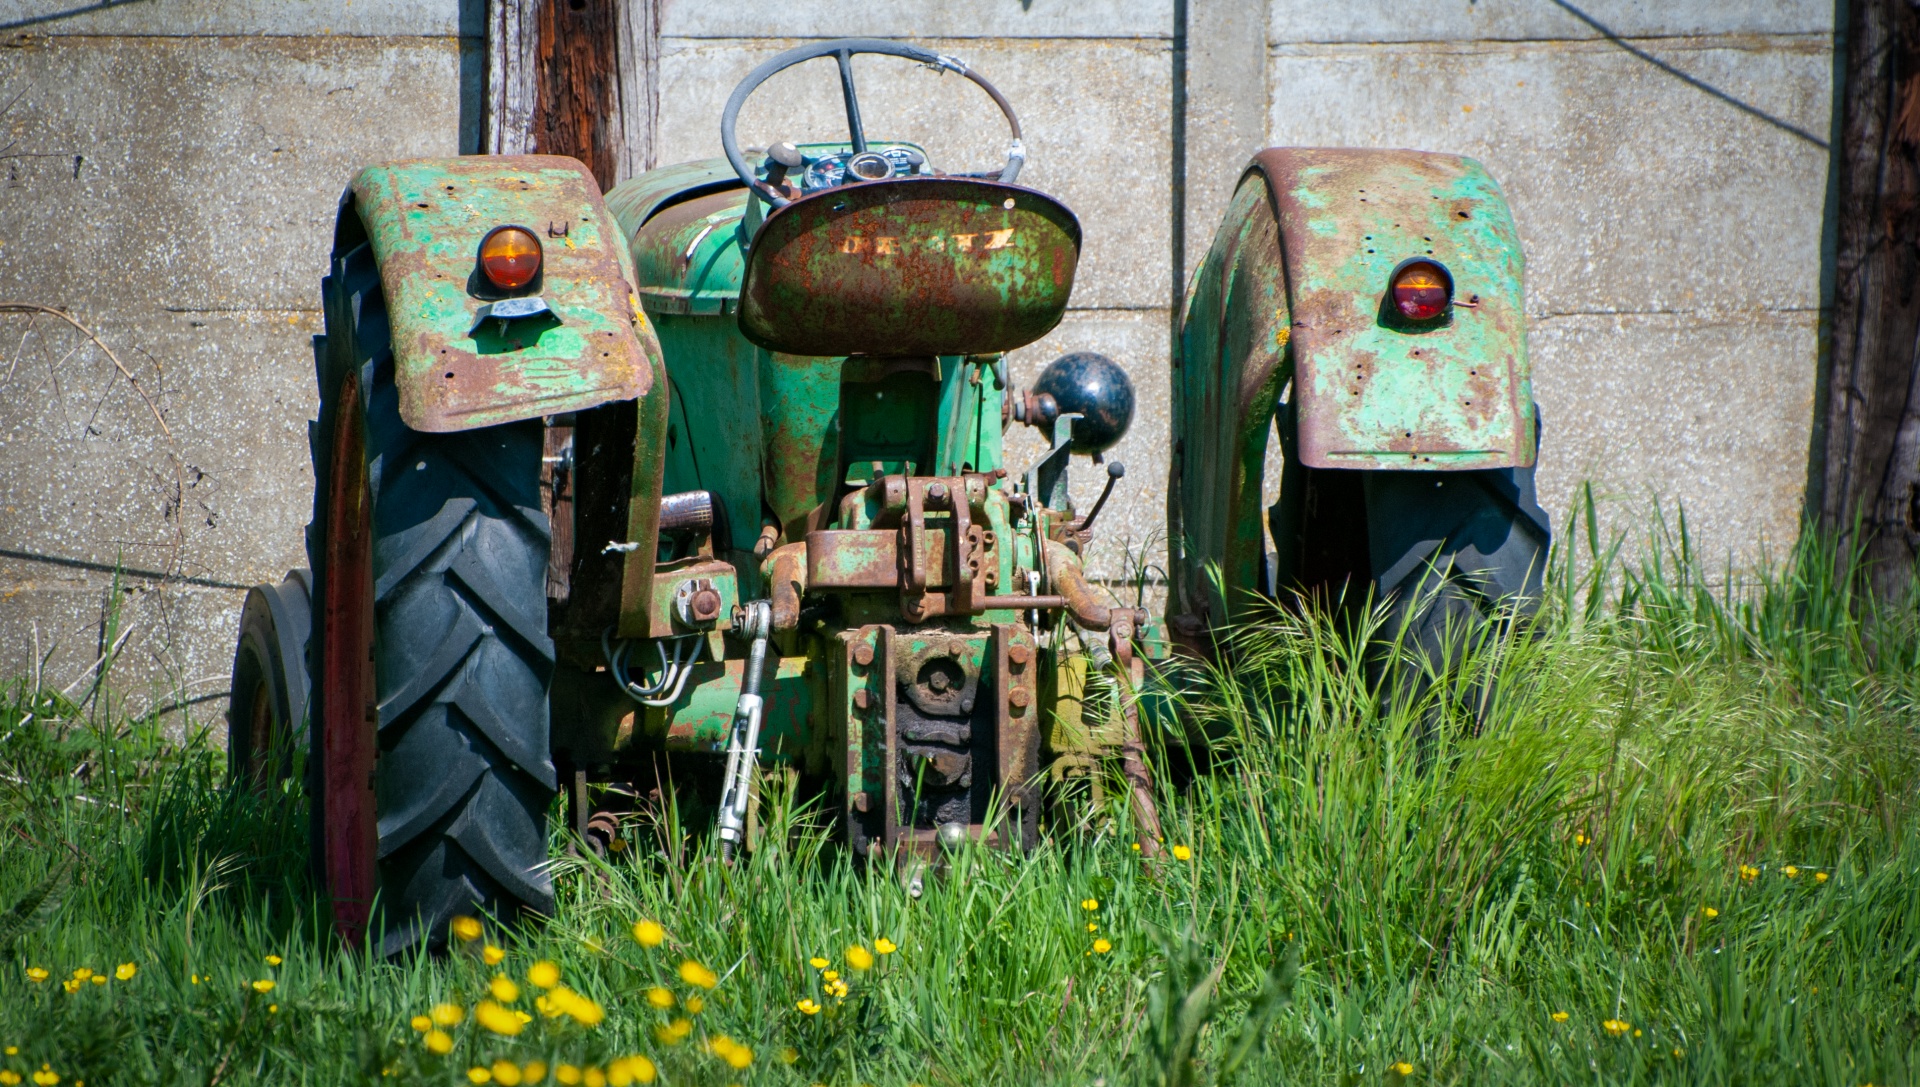 Tractor, Old Tractor